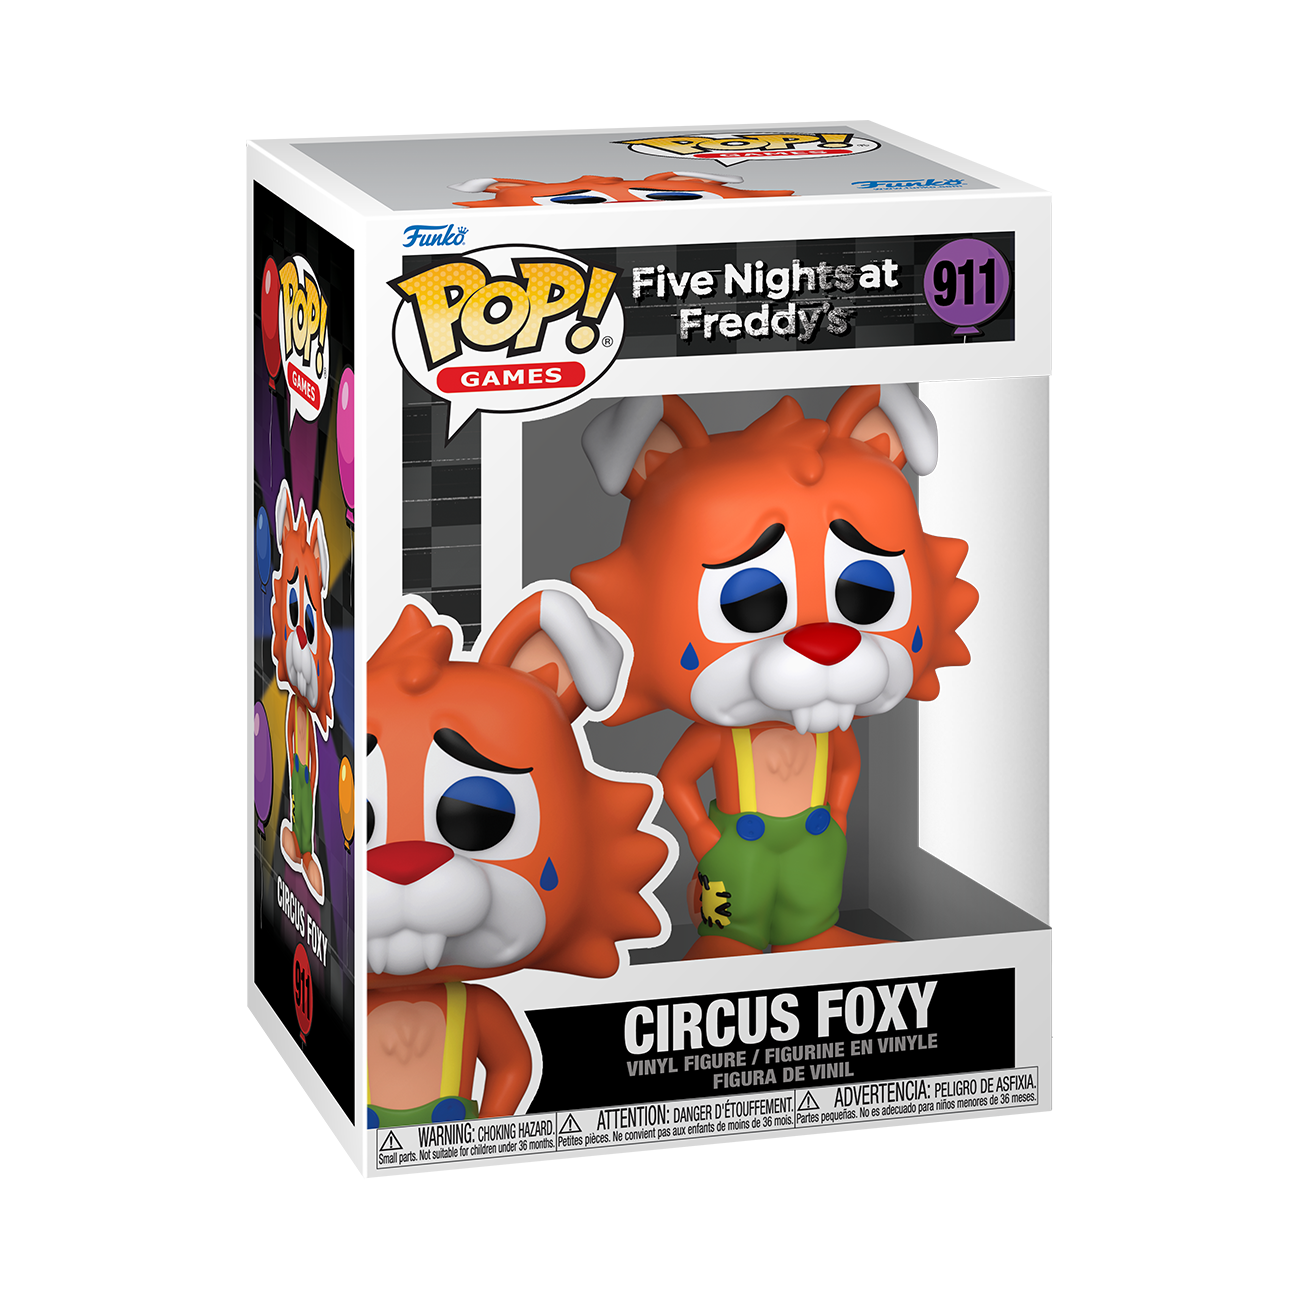 Collectible Circus Foxy #911 Funko Pop figure in box from Five Nights at Freddy's